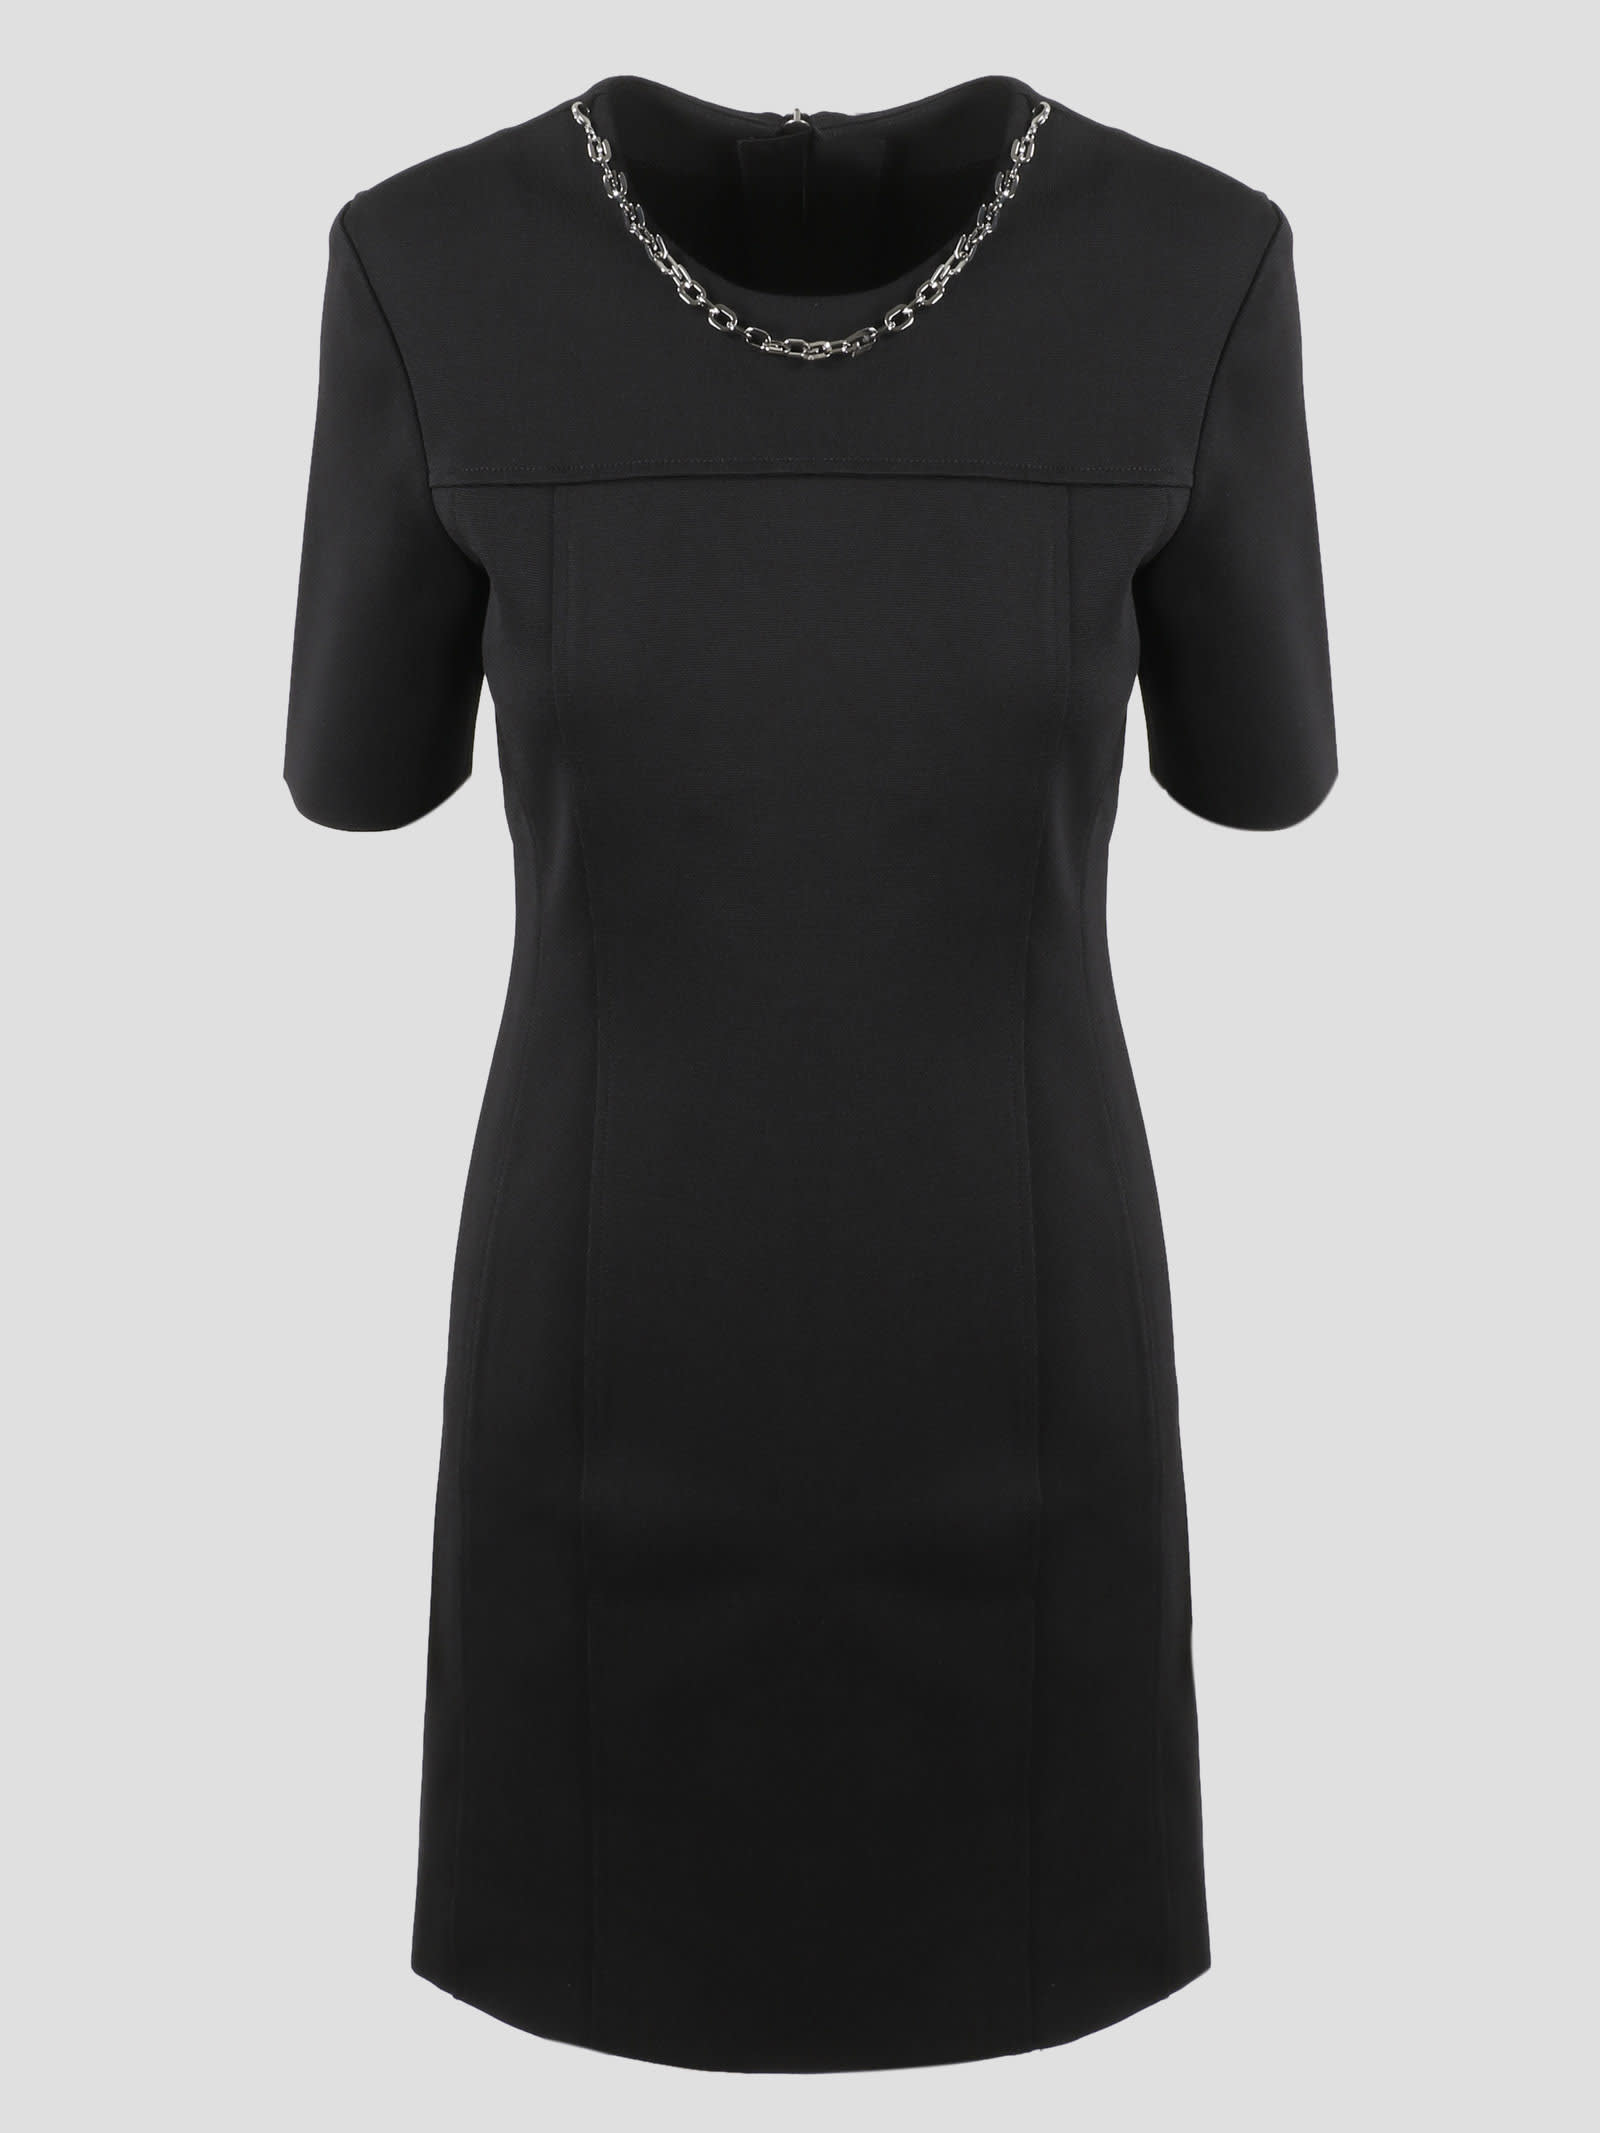 Givenchy G Chain Dress